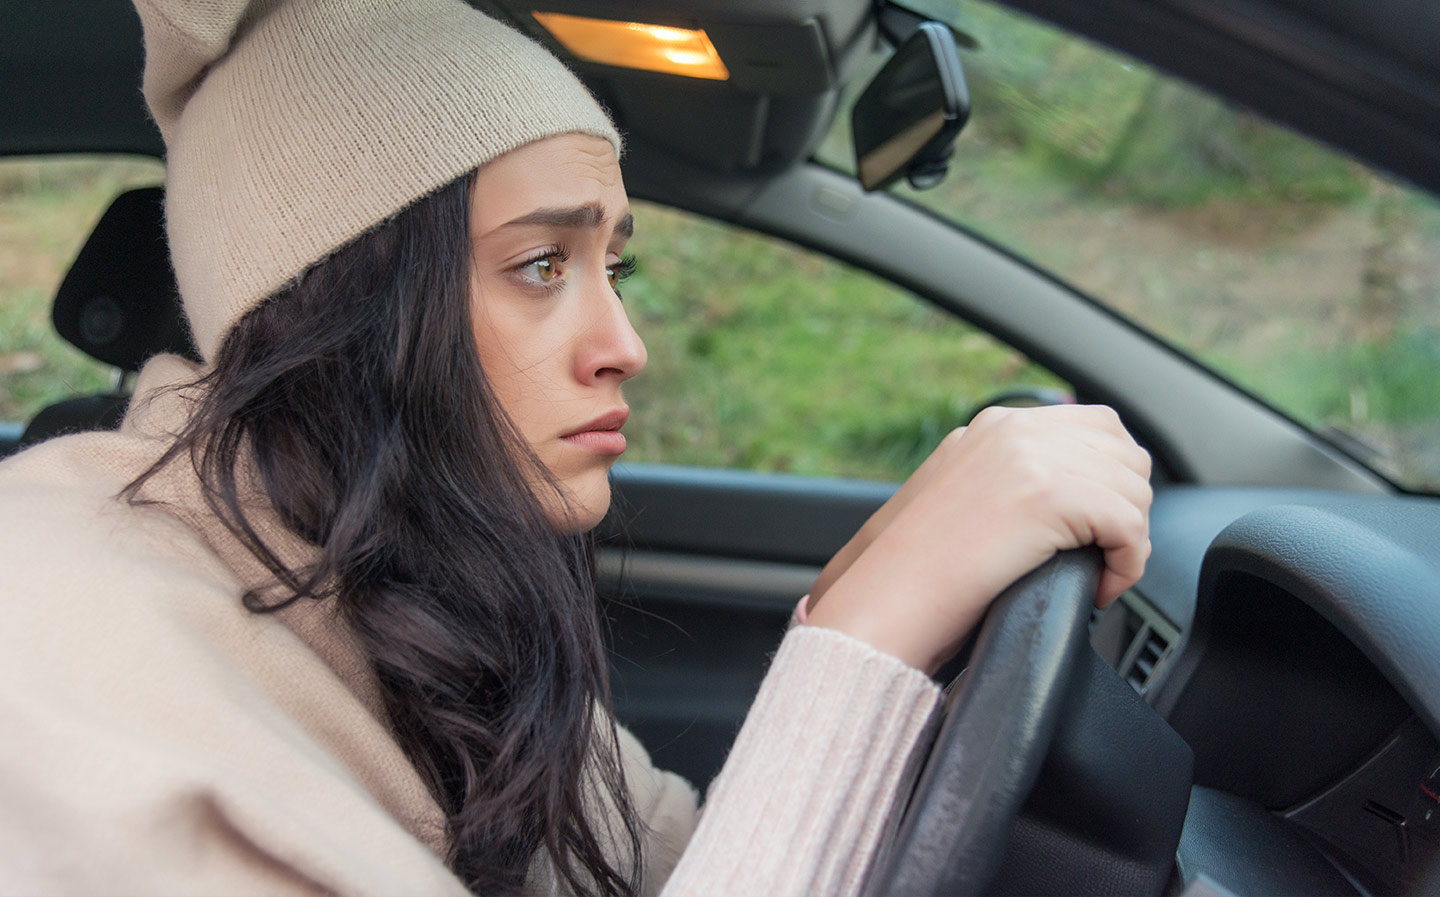 Top tips to deal with your driving nerves this bank holiday weekend